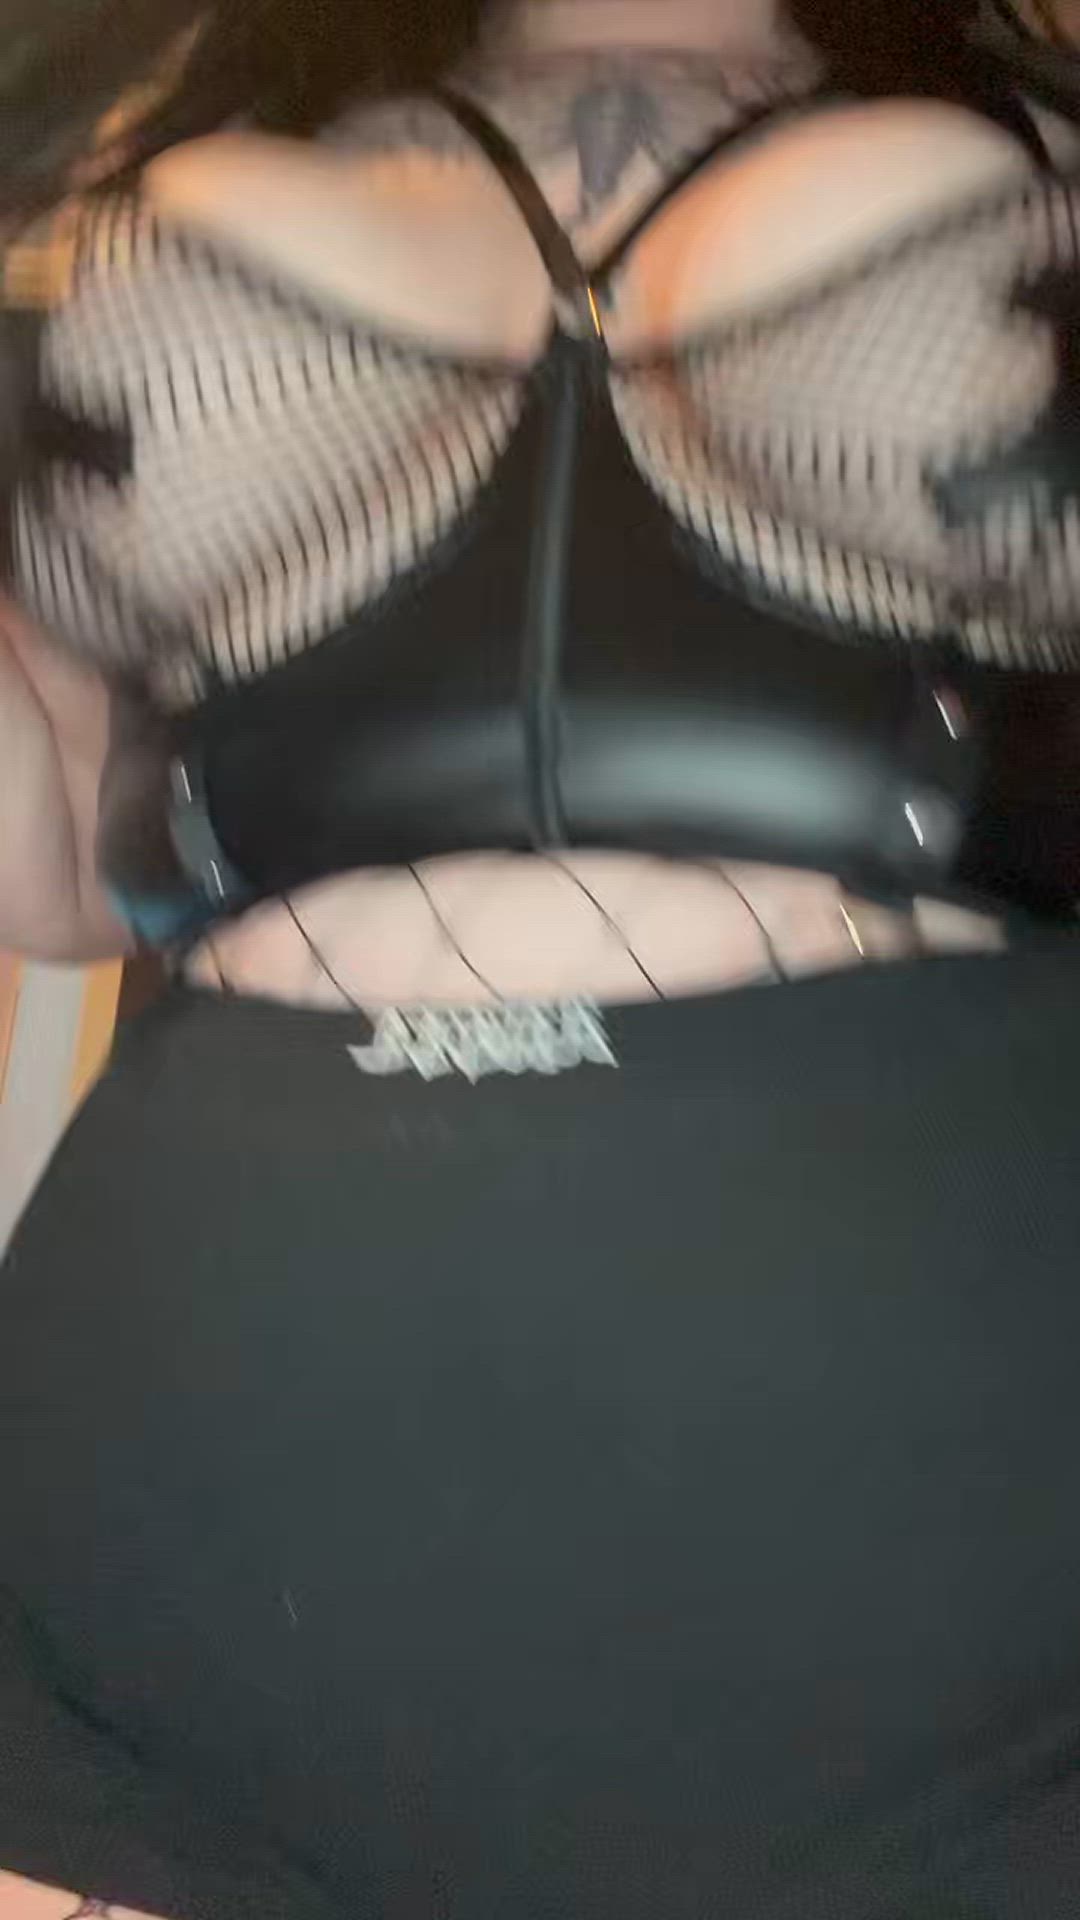 Big Tits porn video with onlyfans model Snap @blossom.bxtch <strong>@bigtiddygothiccgf</strong>